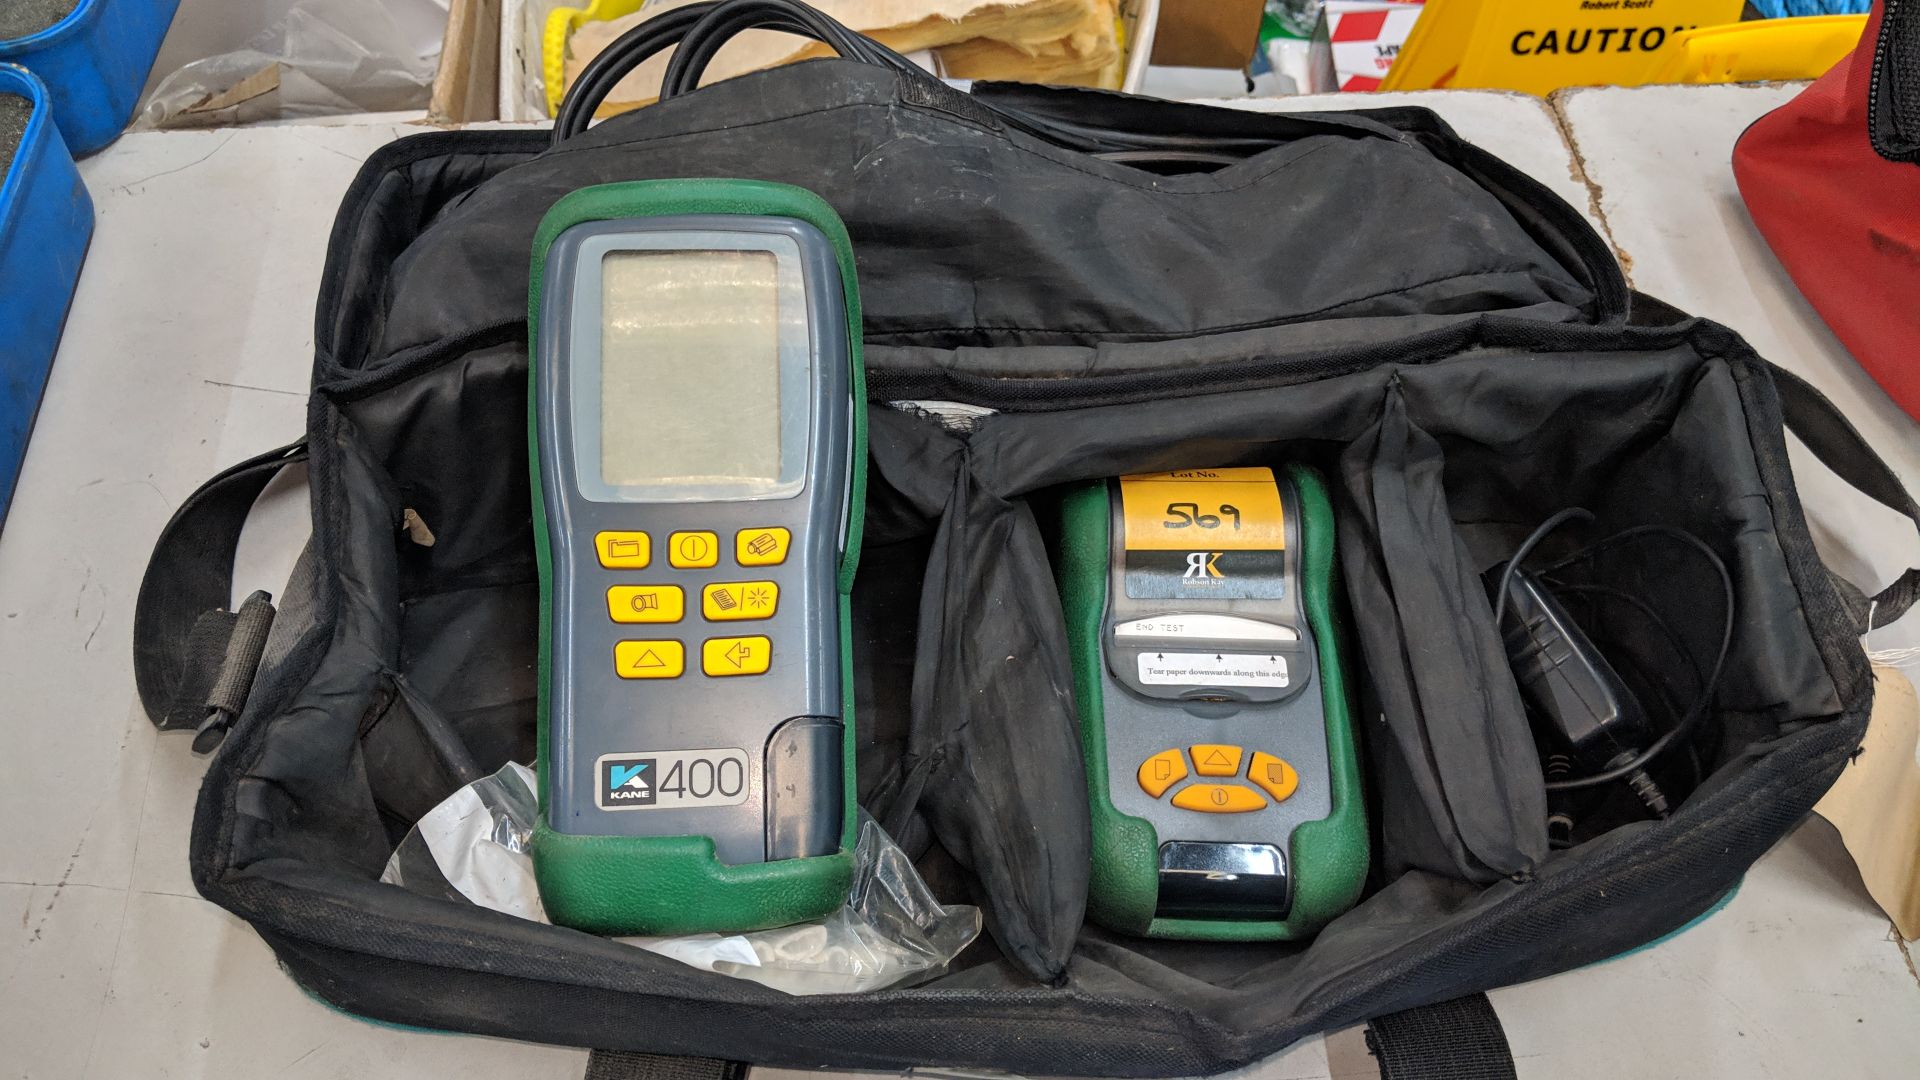 Kane 400 combustion flue gas analyser including accessories, printer and carry case This is one of a